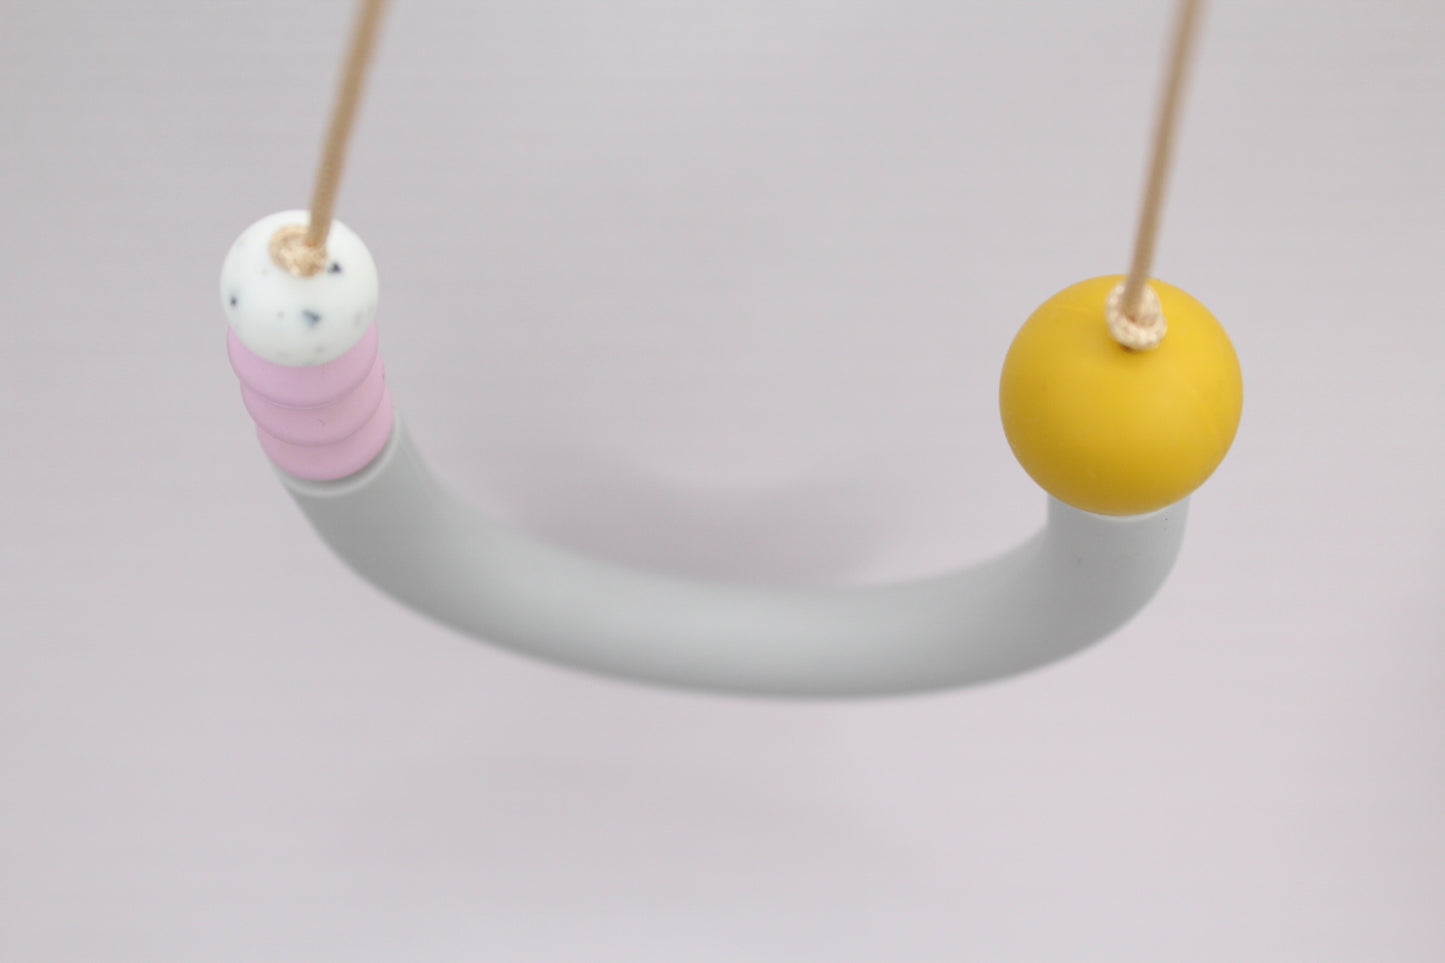 'Suzy' Grey U Shape Silicone Necklace - Dusty Lilac, Mustard and Gritty White